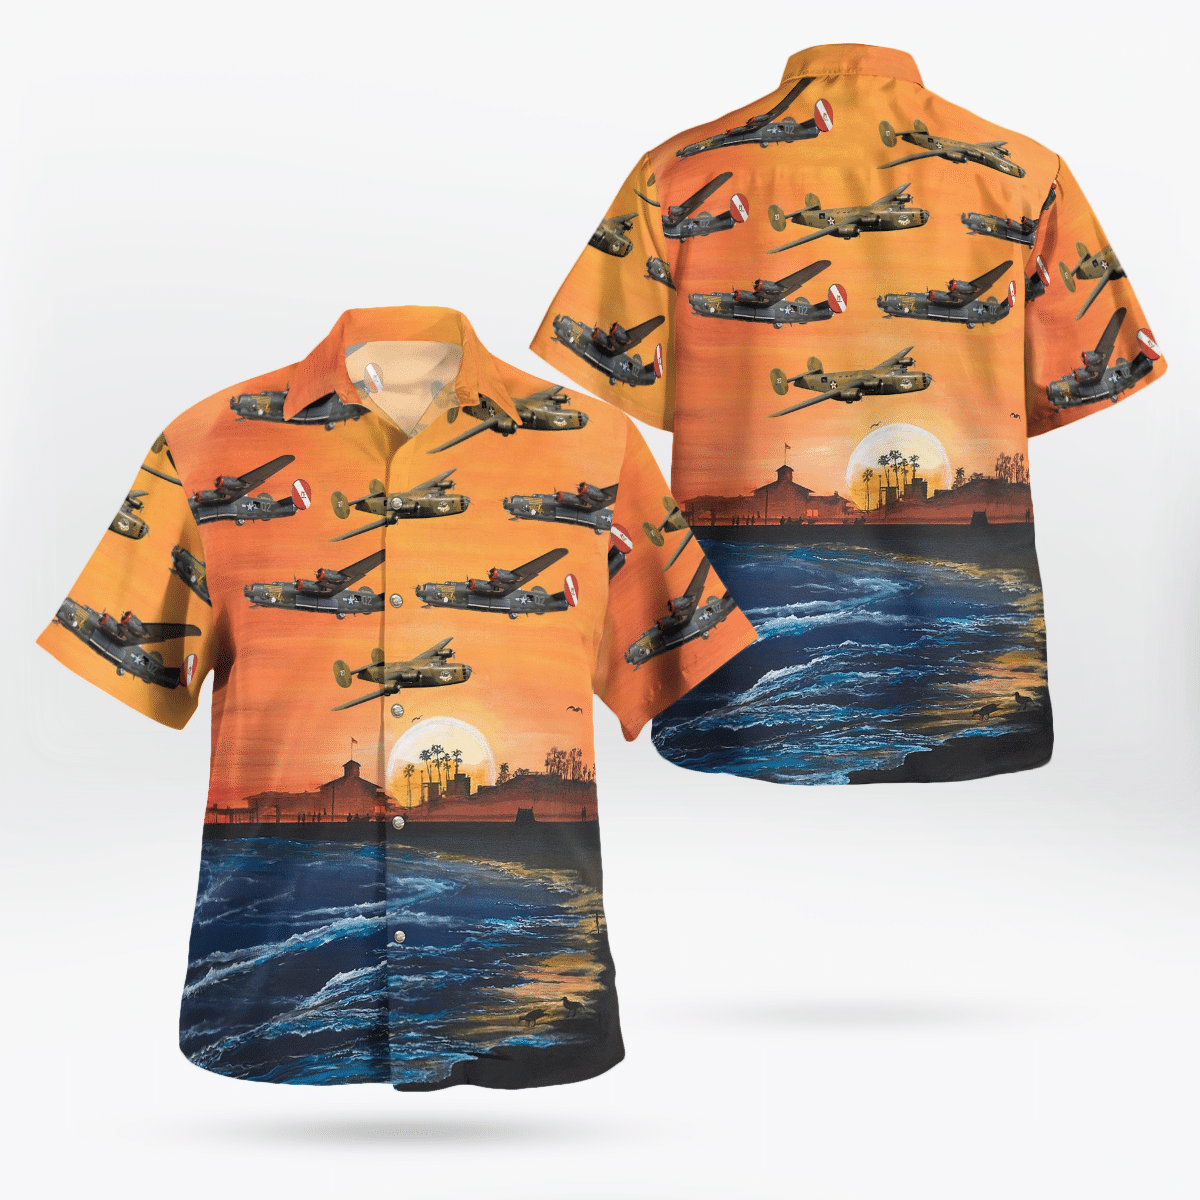 Shop now to find the perfect Hawaii Shirt for your hobby 84